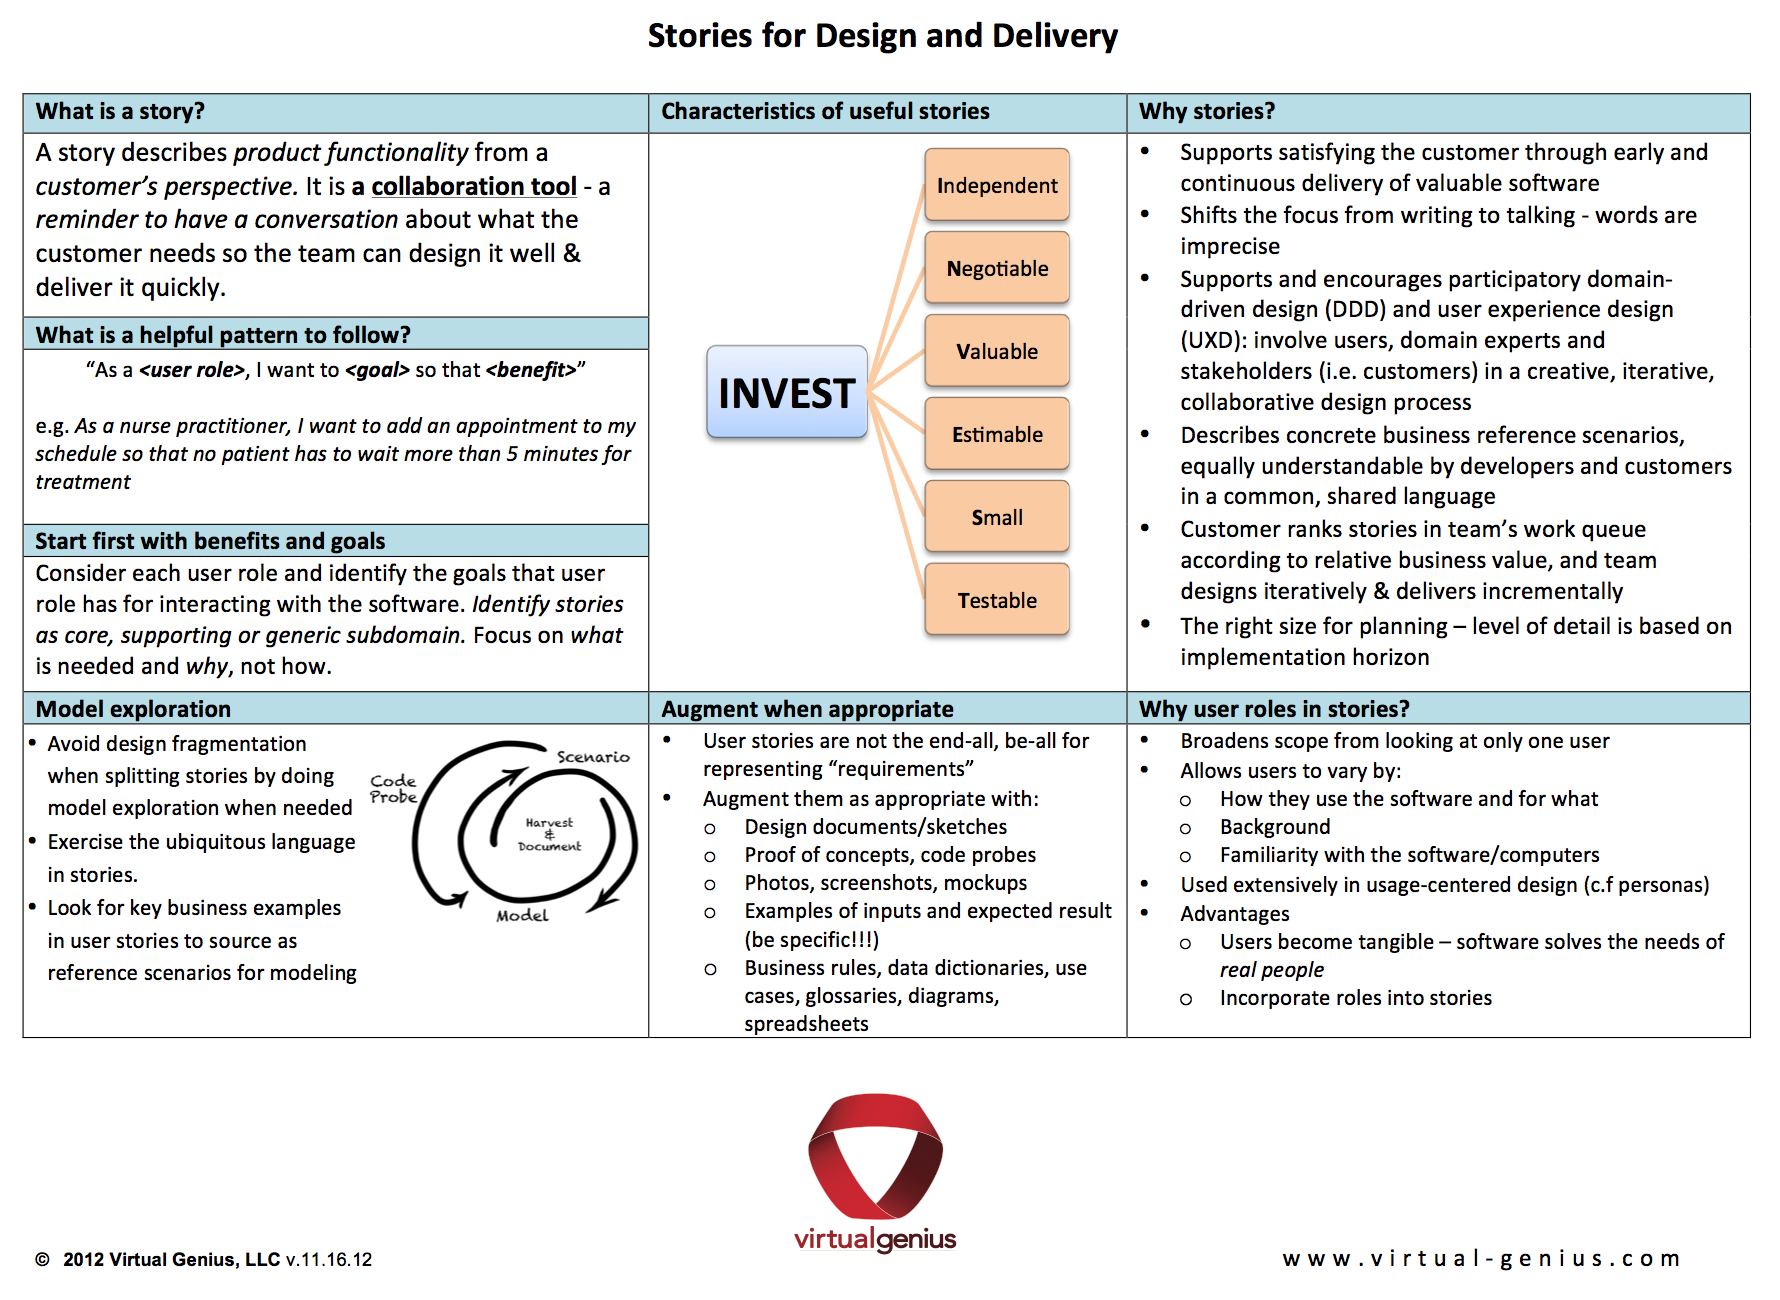 Stories for design and delivery - Front